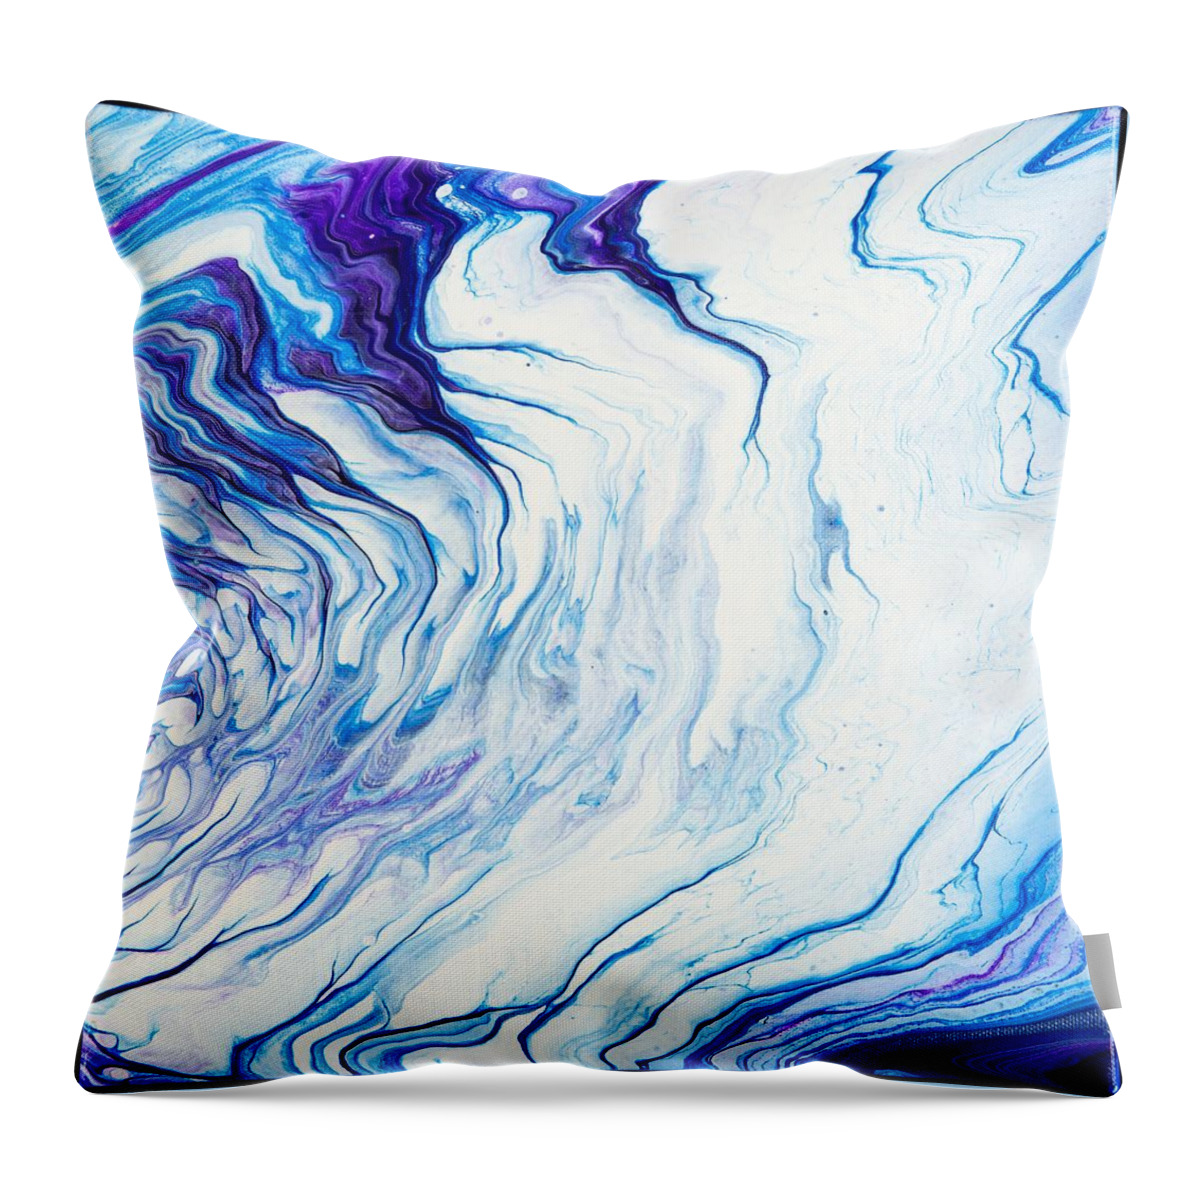 Abstract Throw Pillow featuring the digital art Seawaves - Colorful Flowing Liquid Marble Abstract Contemporary Acrylic Painting by Sambel Pedes